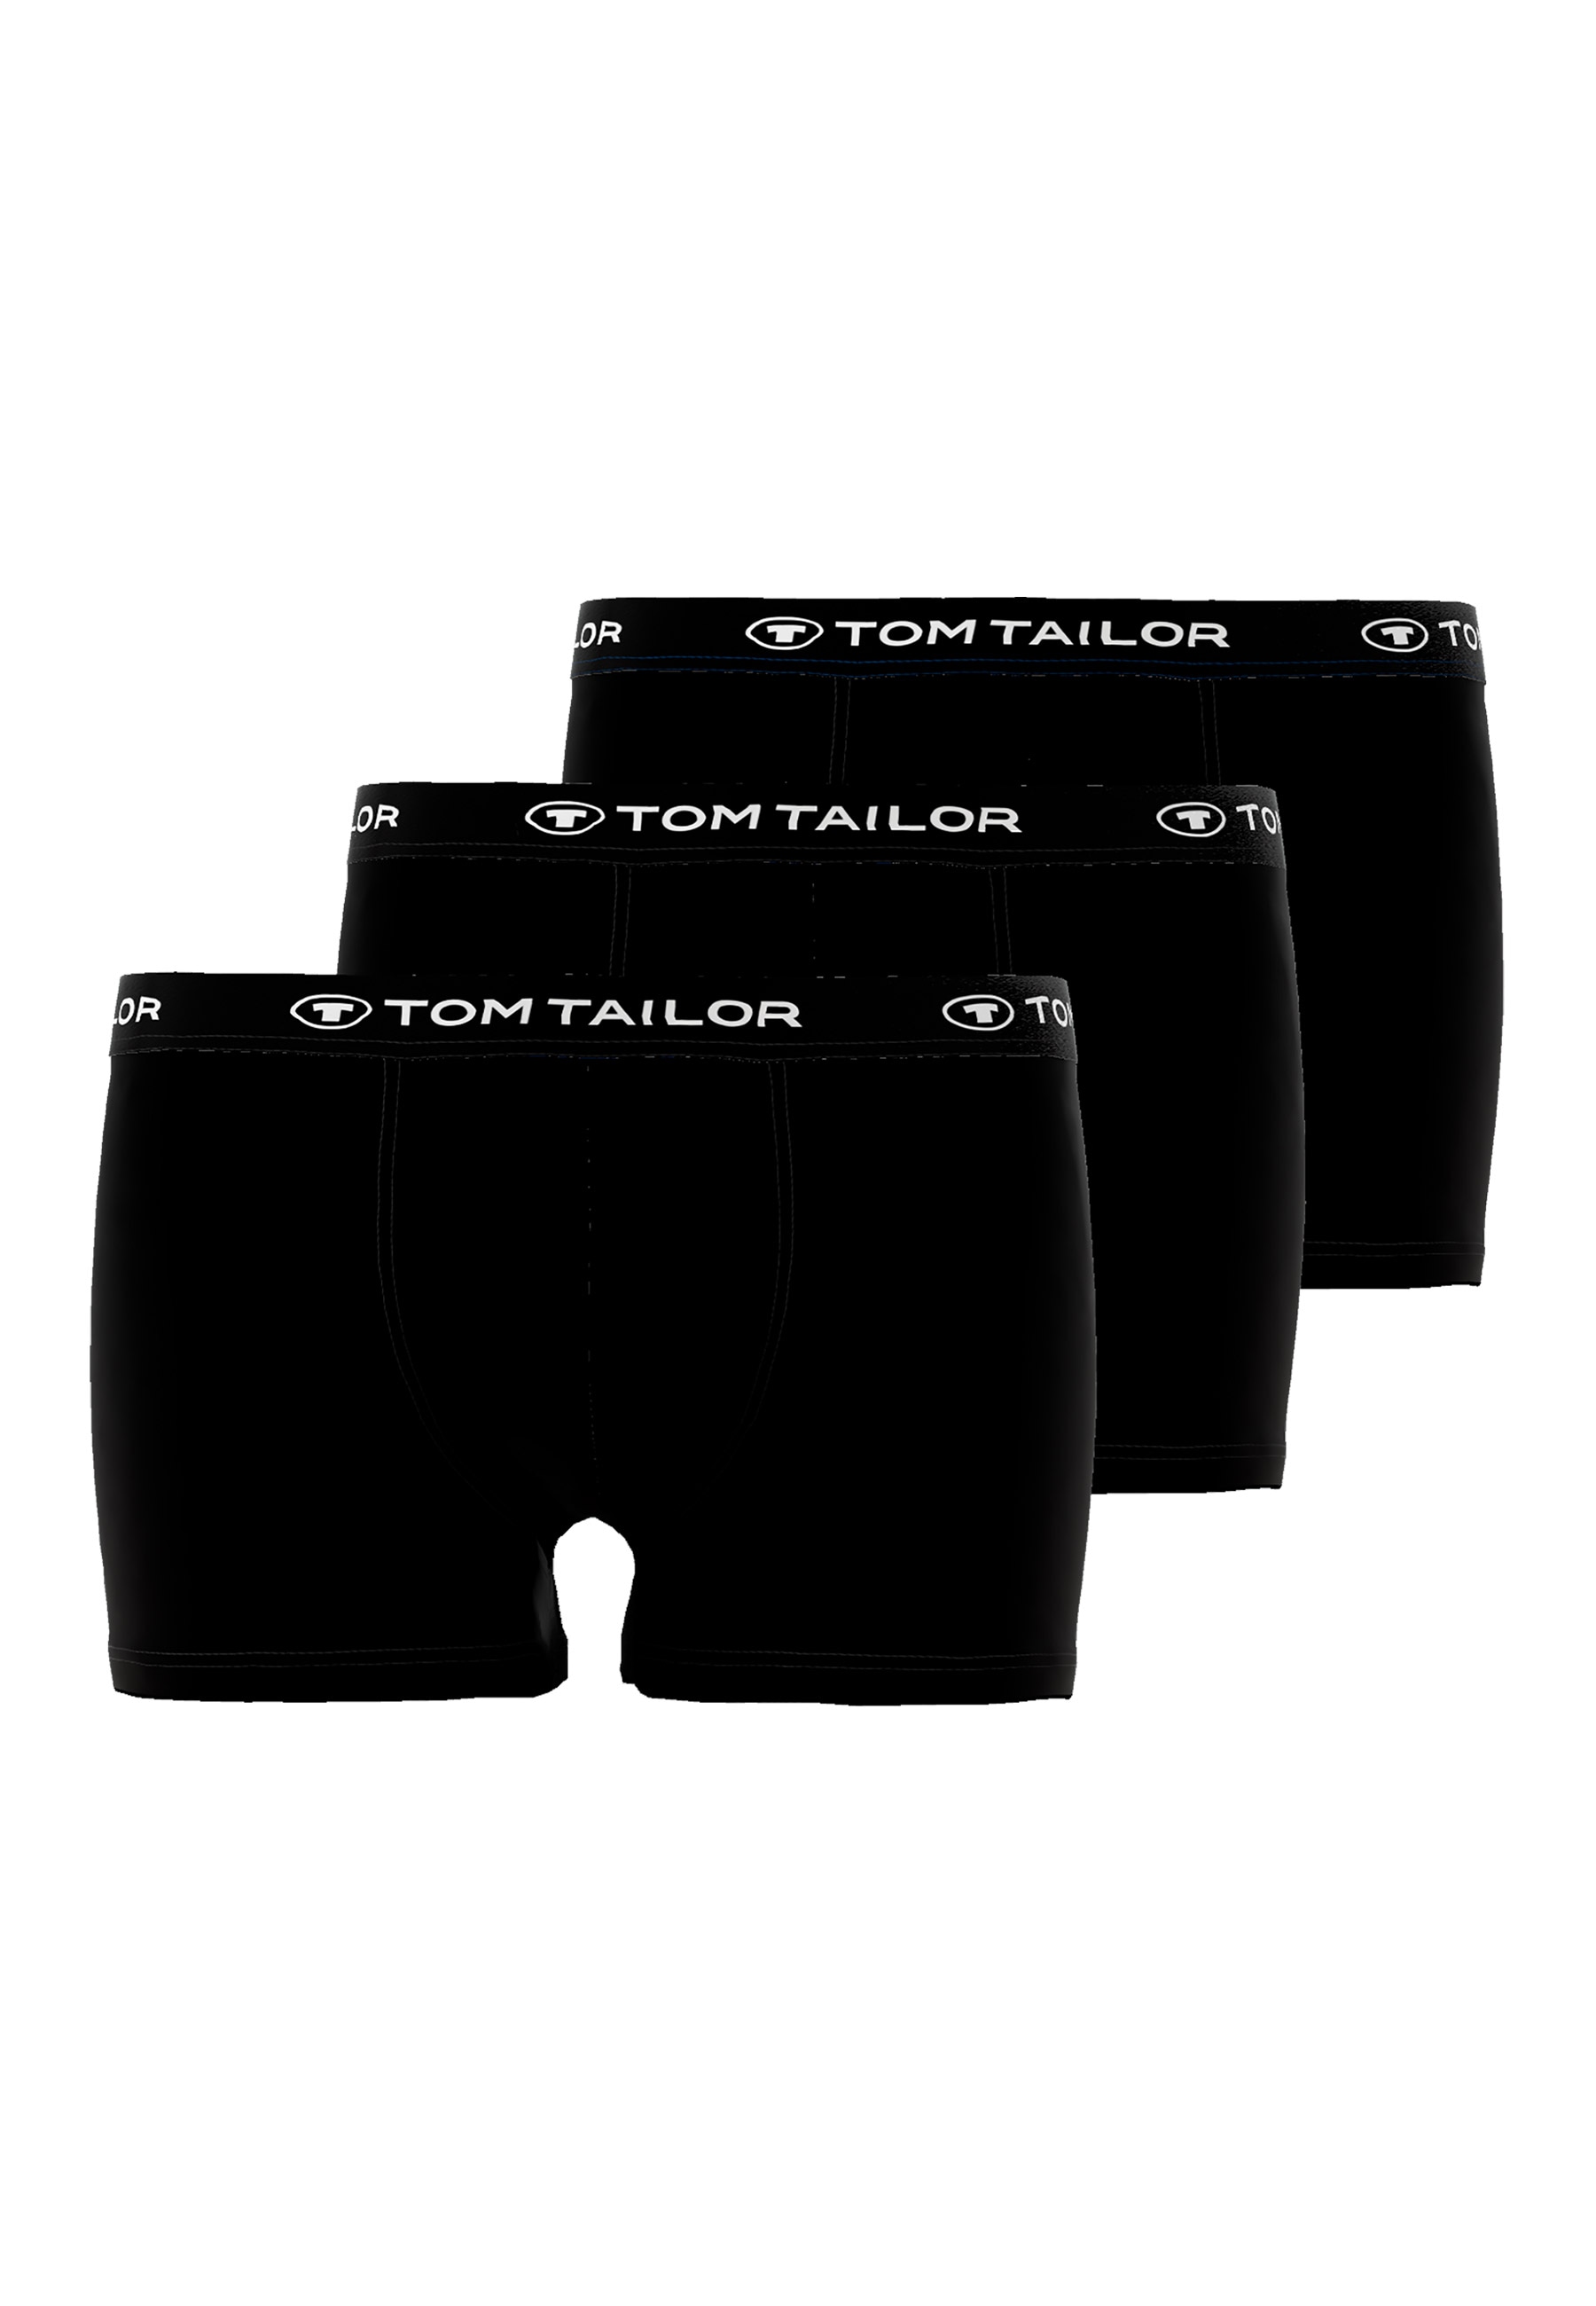 TOM TAILOR Boxershorts "Buffer", (Packung, 3 St.)